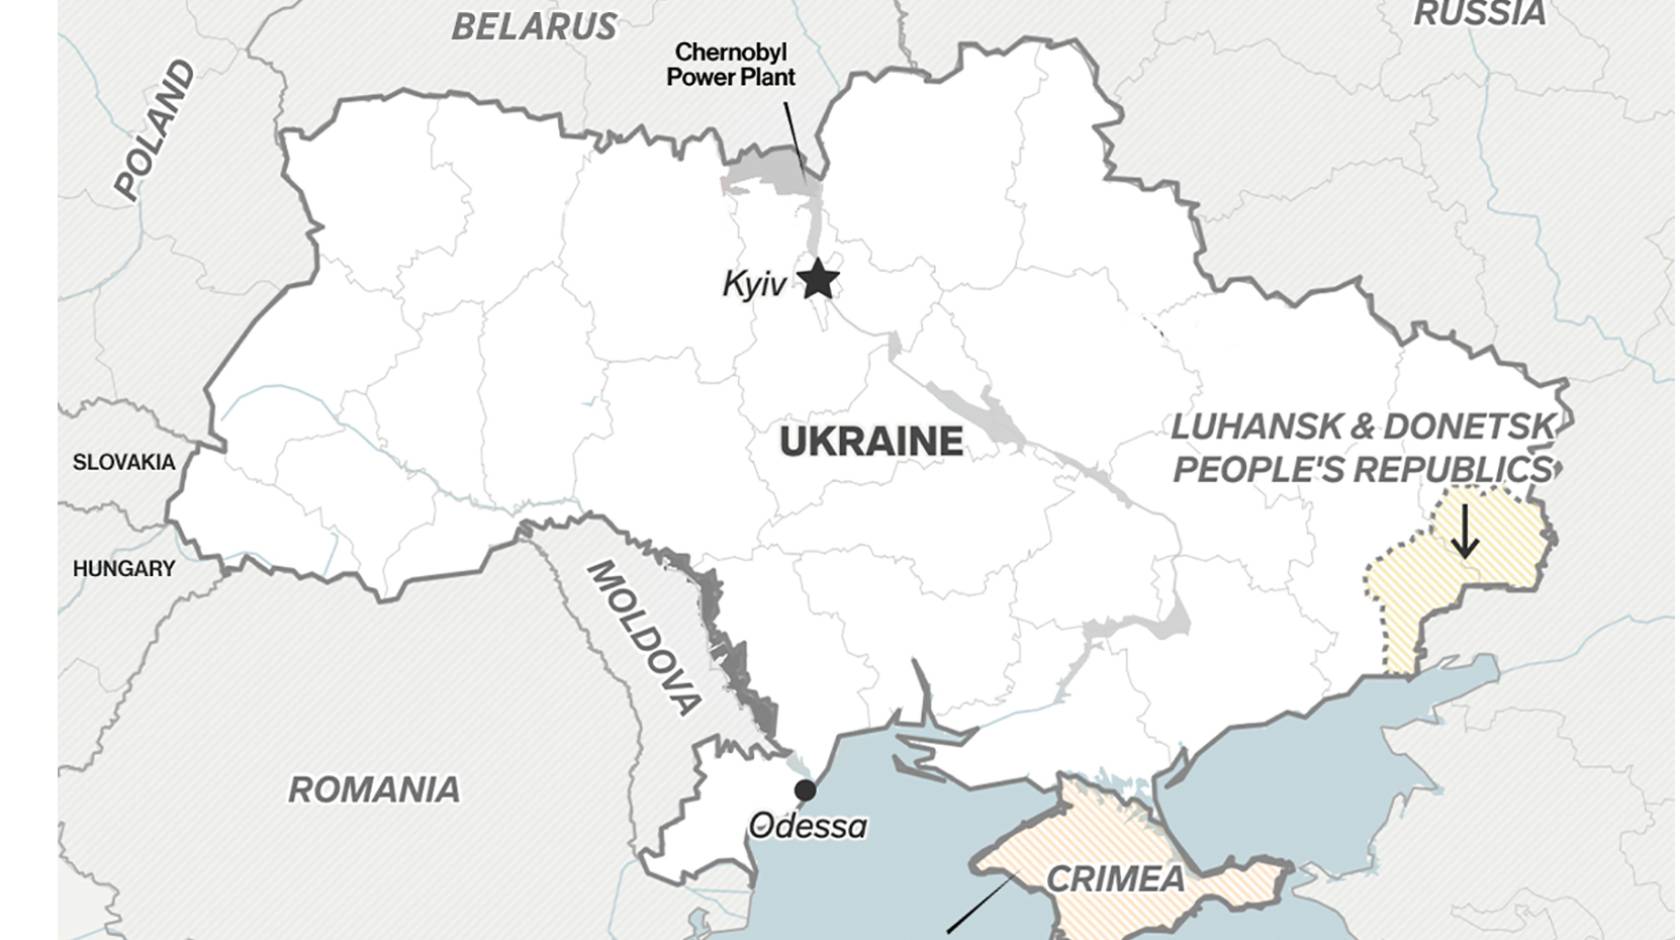 Map showing key regions related to the Feb. 23 Russian invasion of Ukraine.